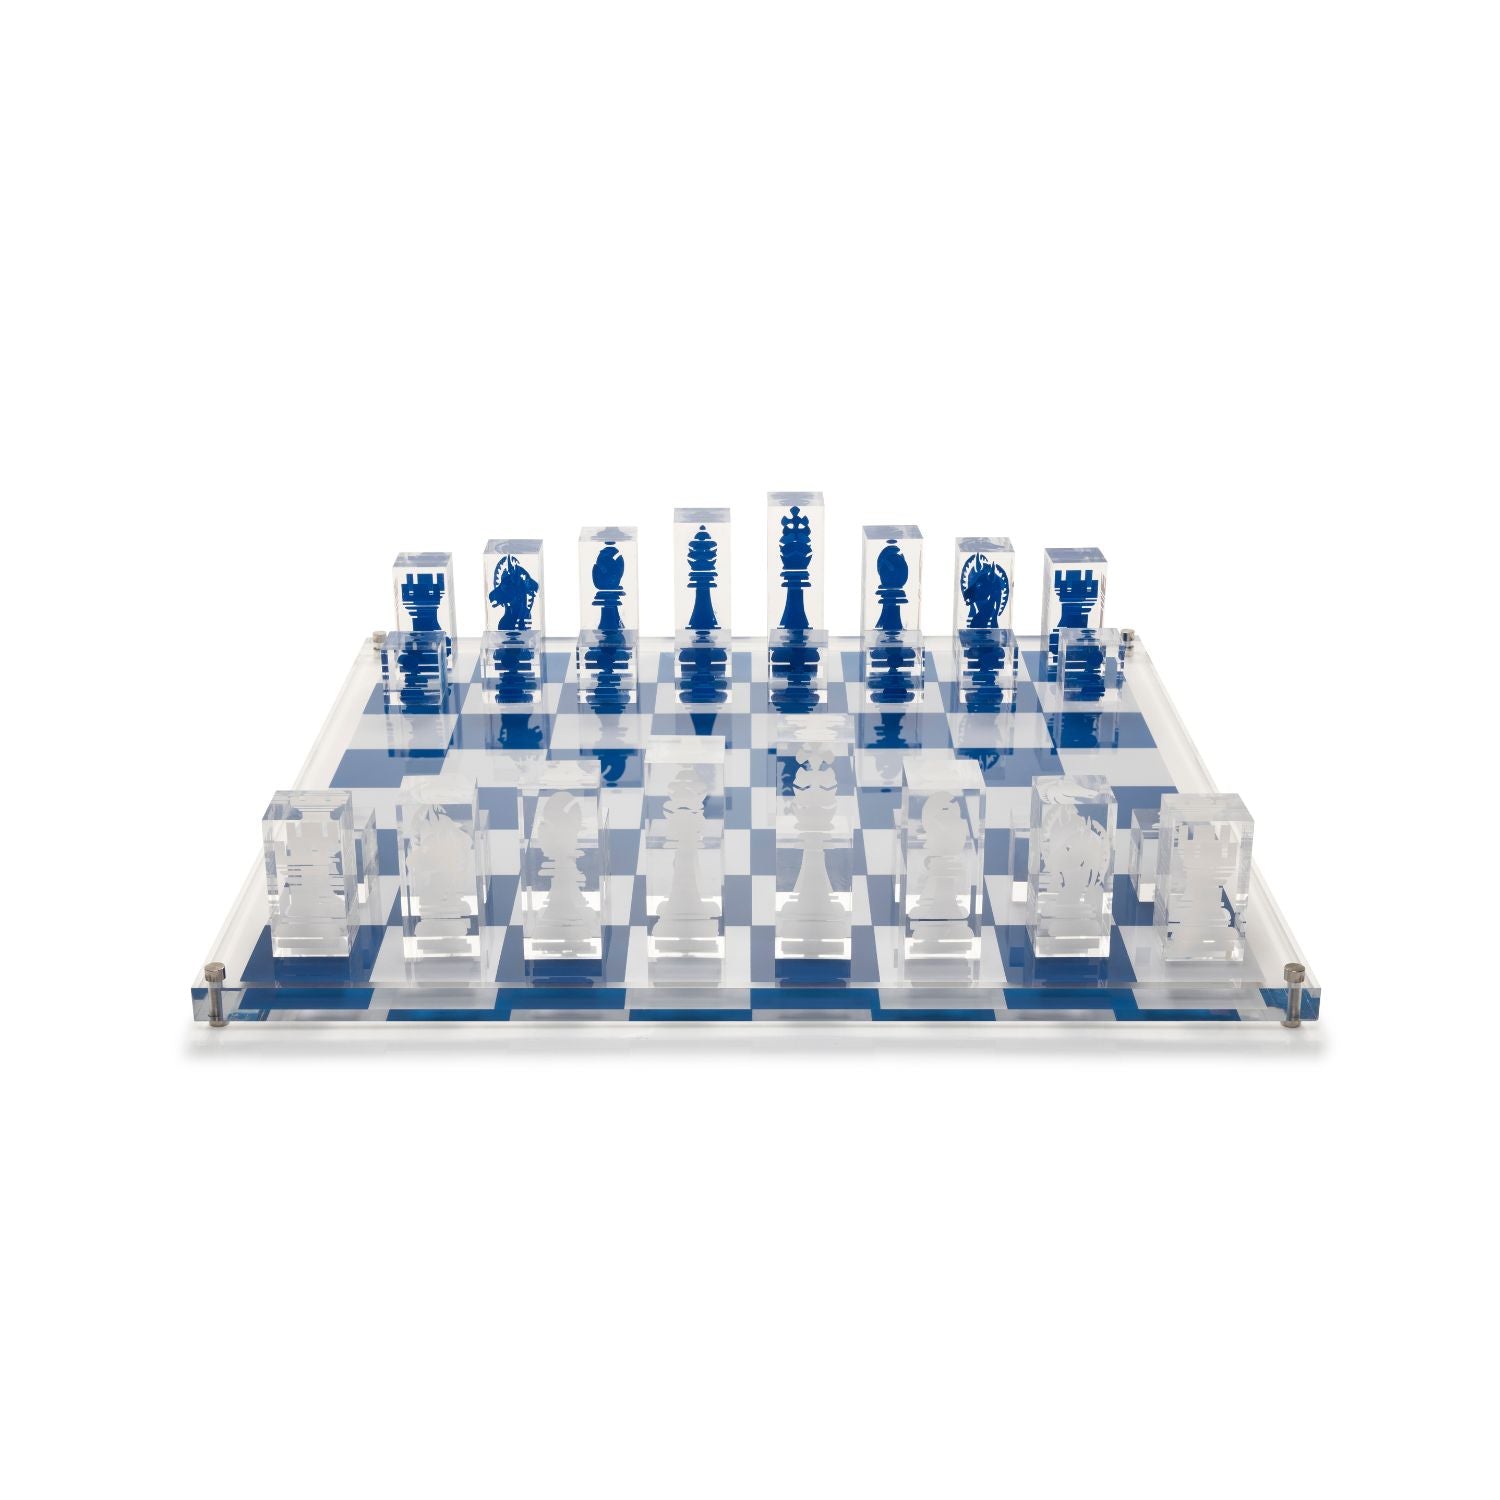 Acrylic Chess Set with White and Dark Blue Pieces